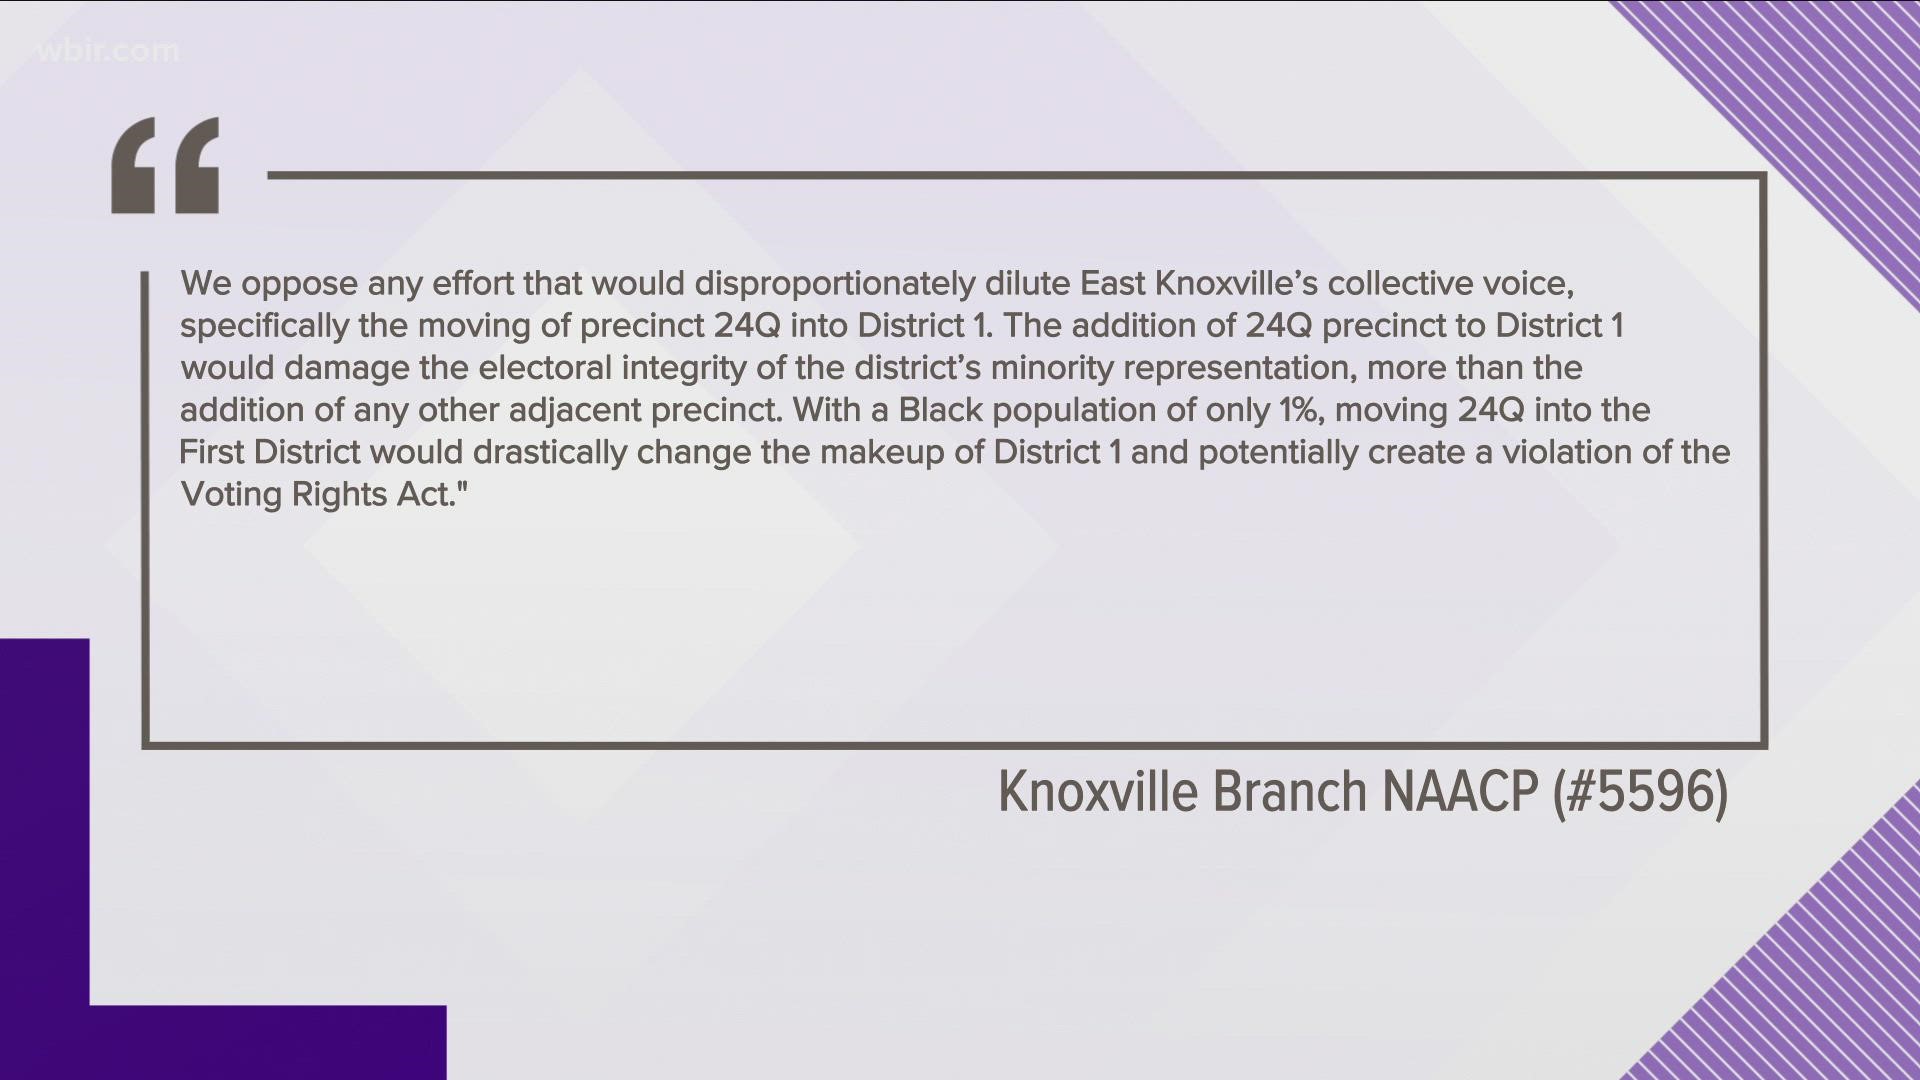 The NAACP has written to oppose one local redistricting plan that would shift a Sequoyah Hills precinct into District 1 from District 4.